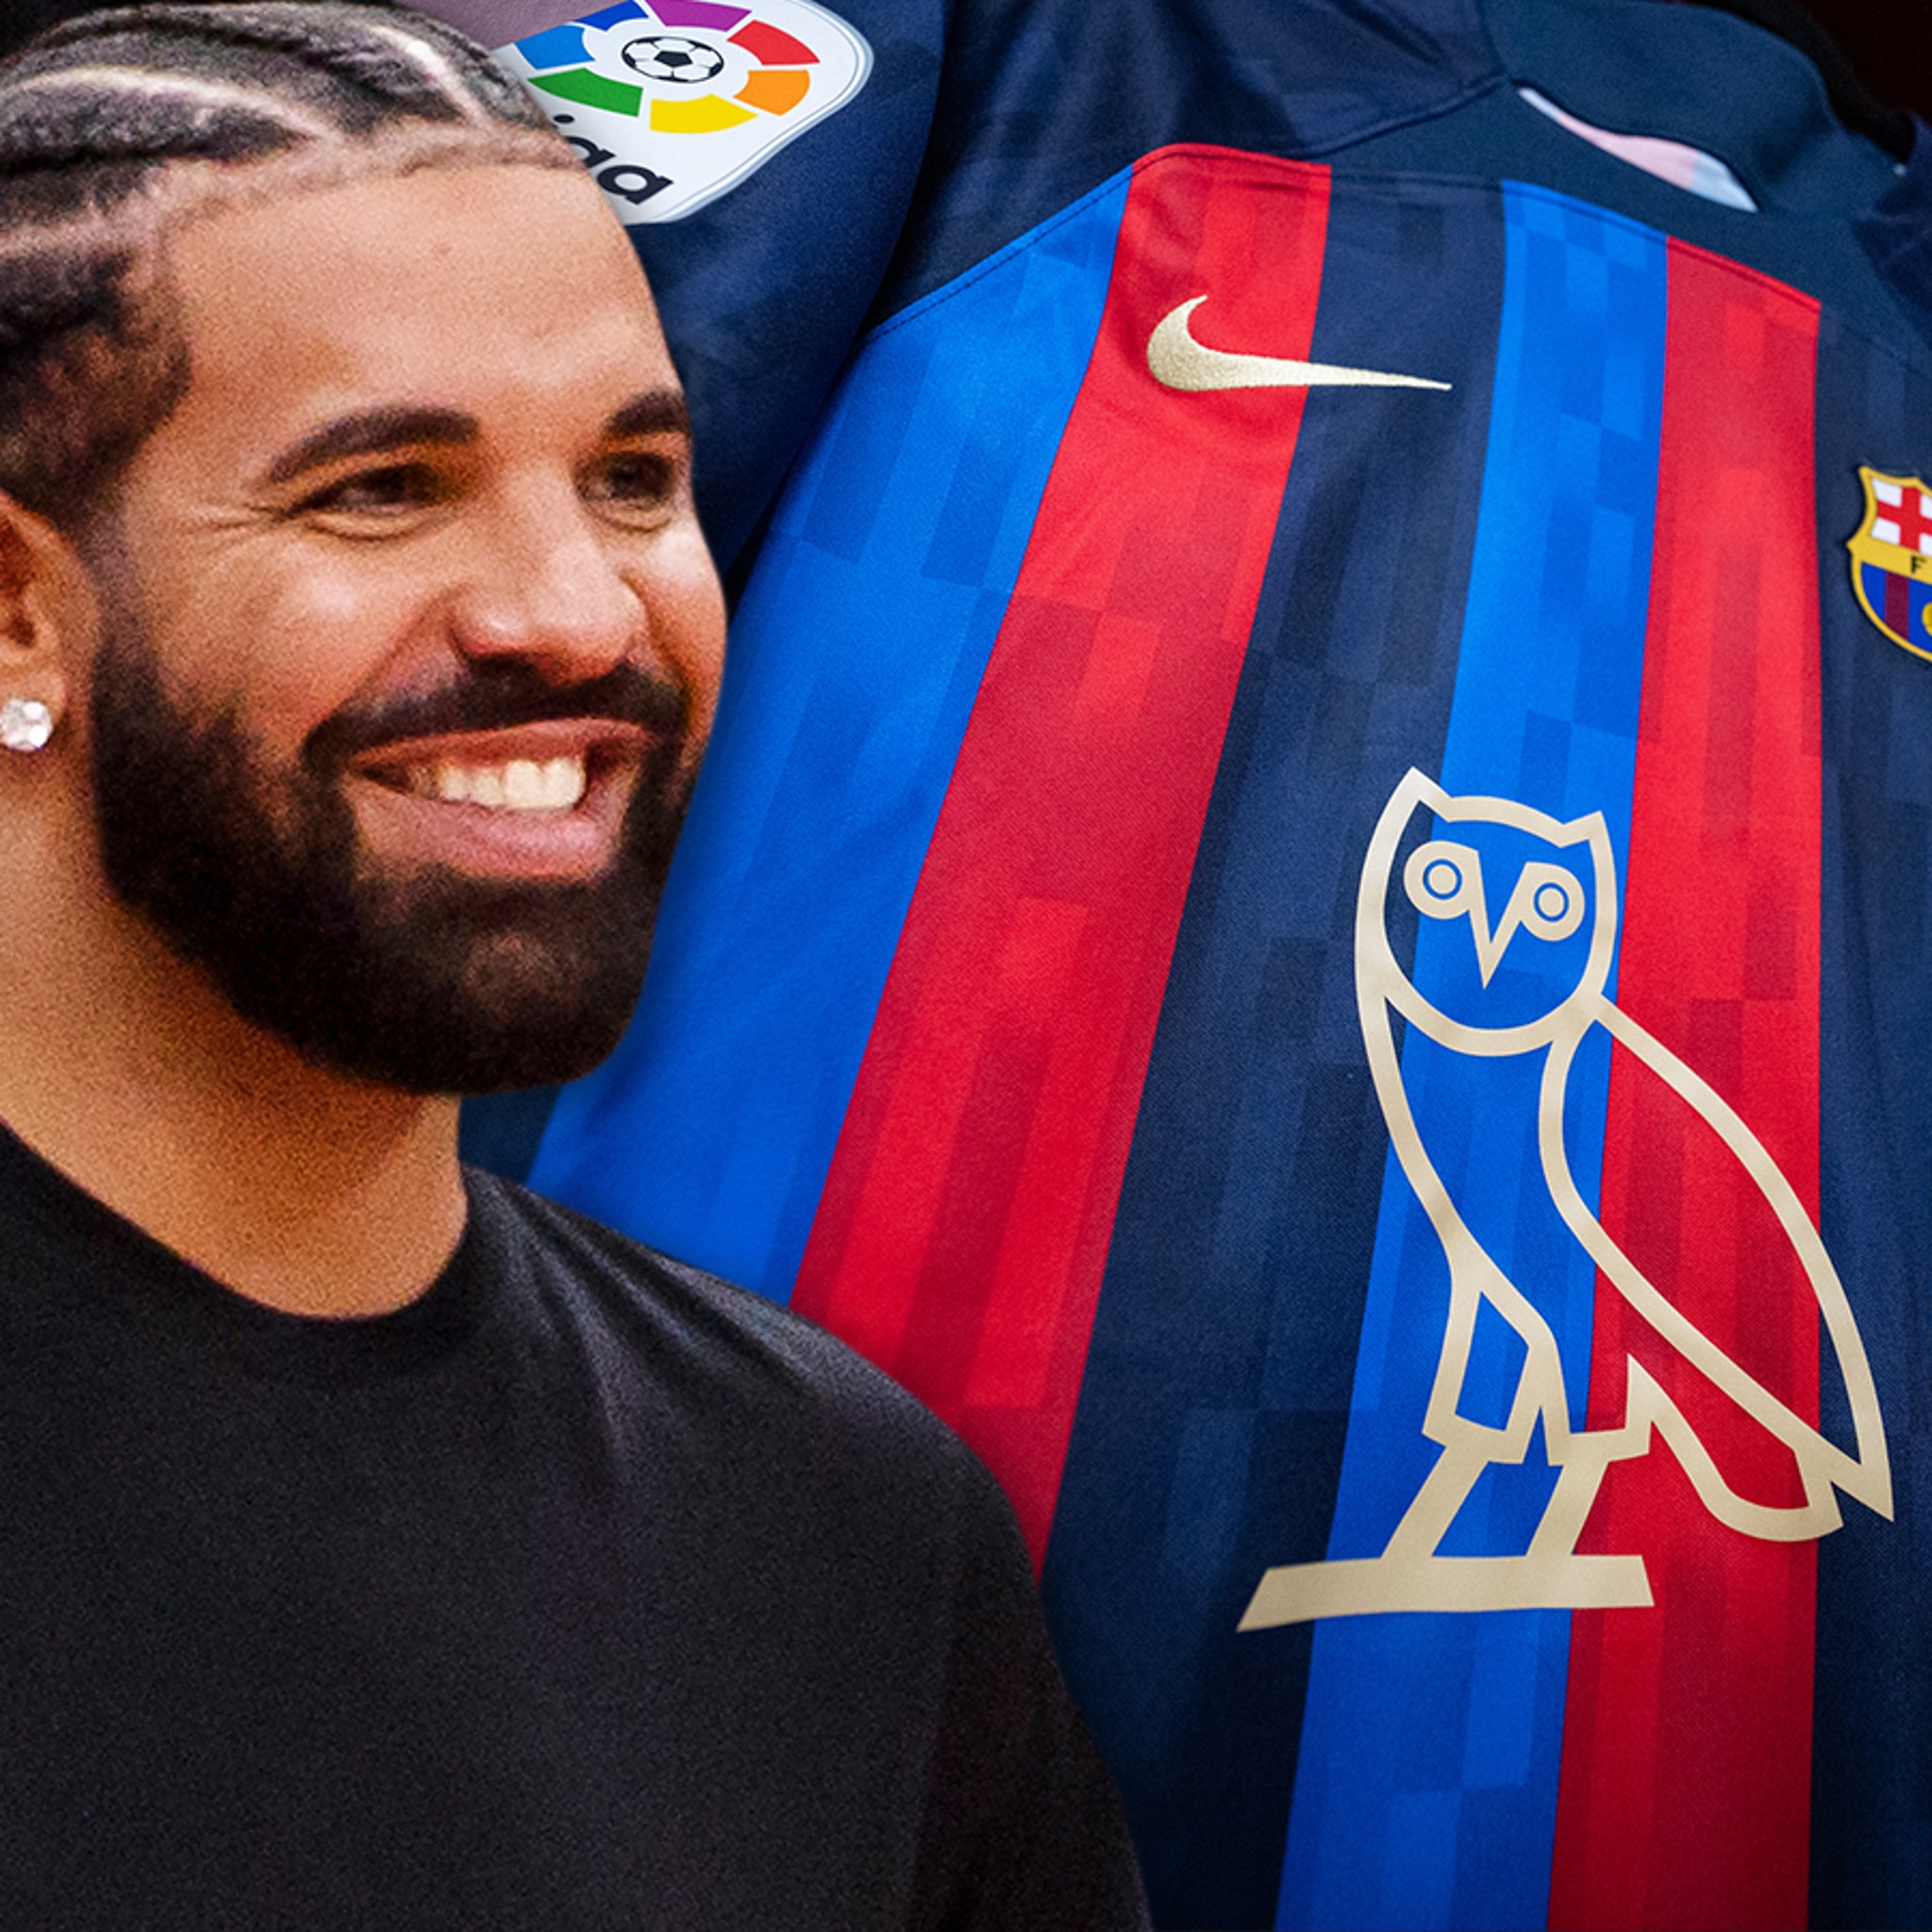 The jersey of FC Barcelona worn by Drake on his account Instagram  @champagnepapi